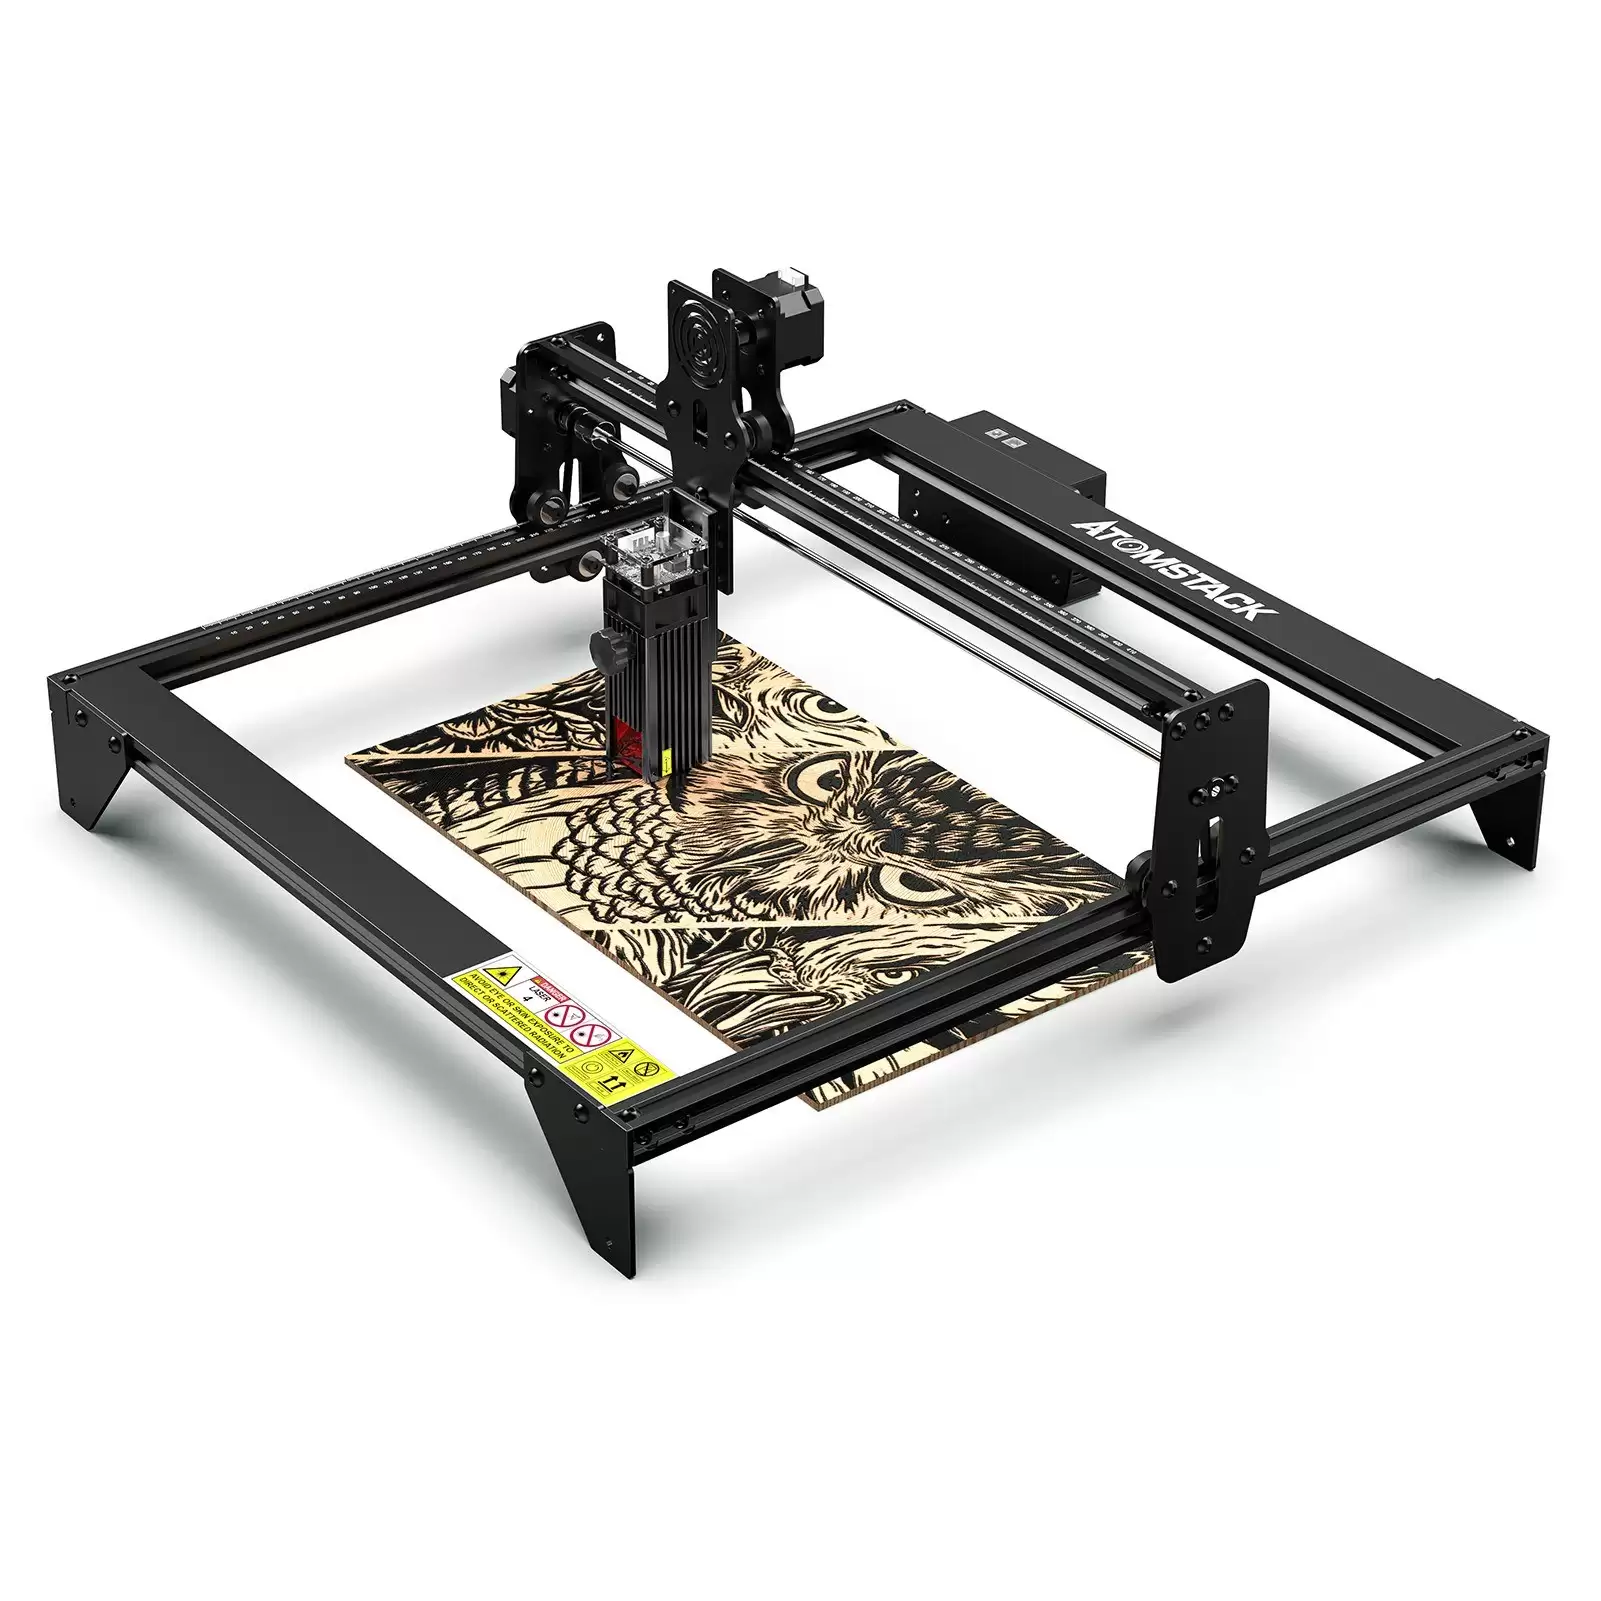 Order In Just $5 [Us Warehouse] $50 Off Atomstack A5 M40 Laser Engraver 410*400mm Carving Area, $289 (Inclusive Of Vat) At Tomtop